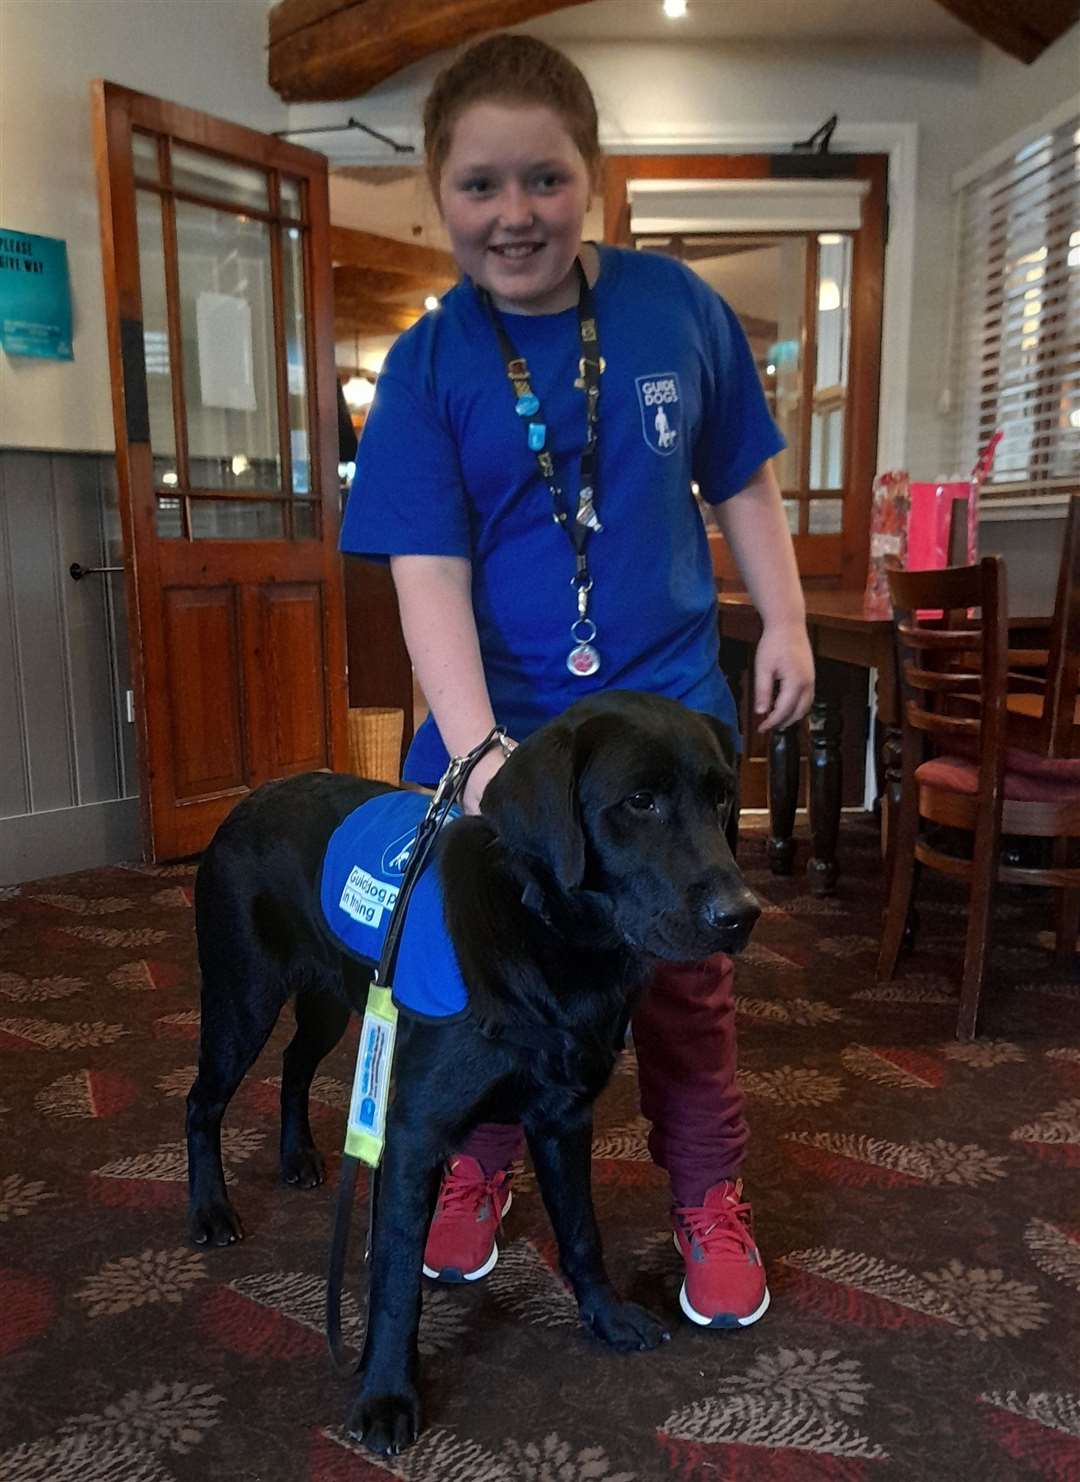 Scarlett Elliott has raised more than £10,000 for the Guide Dogs through a number of fundraising activities